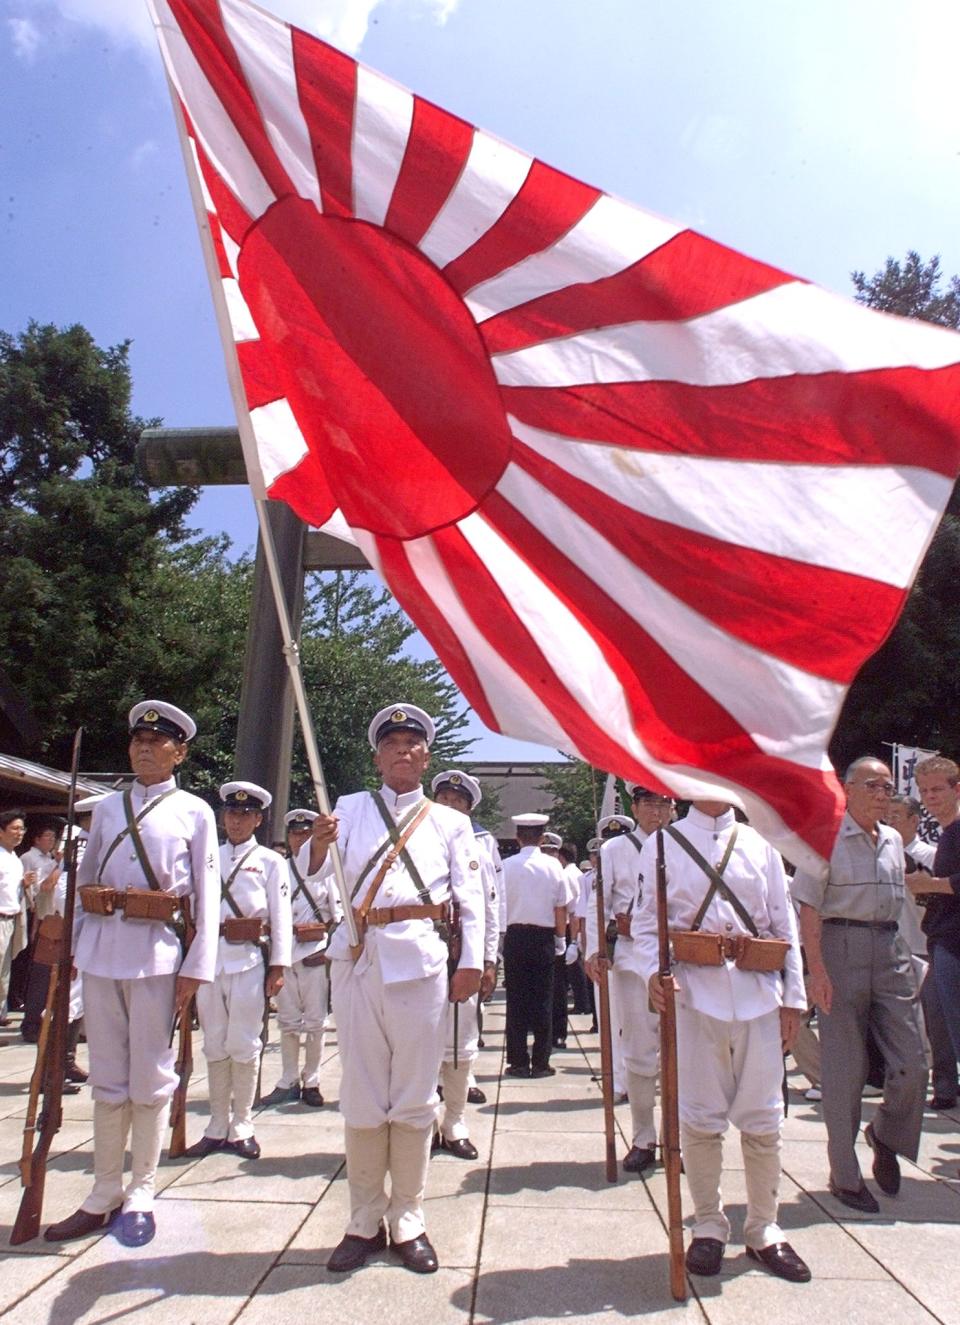 In front of the flag of the Rising Sun, World War II veterans in Imperial Navy uniforms pray for the war-dead at the Yasukuni Shrine in Tokyo 15 August 1999, on the 54th anniversary of Japan's surrender. (Toru Yamanaka/AFP via Getty Images)